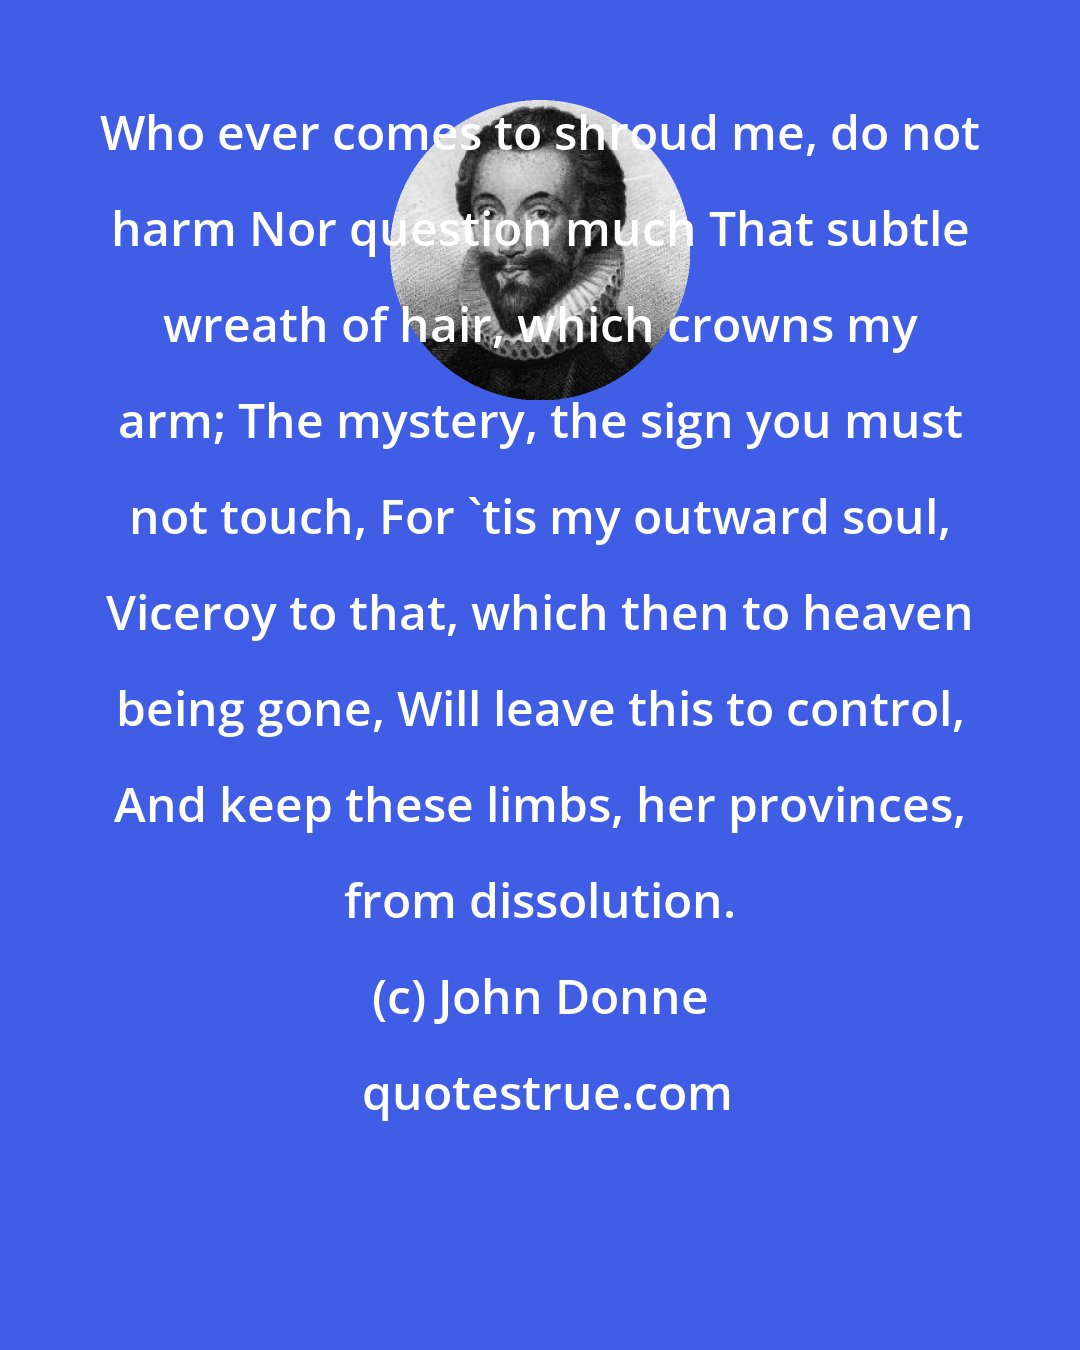 John Donne: Who ever comes to shroud me, do not harm Nor question much That subtle wreath of hair, which crowns my arm; The mystery, the sign you must not touch, For 'tis my outward soul, Viceroy to that, which then to heaven being gone, Will leave this to control, And keep these limbs, her provinces, from dissolution.